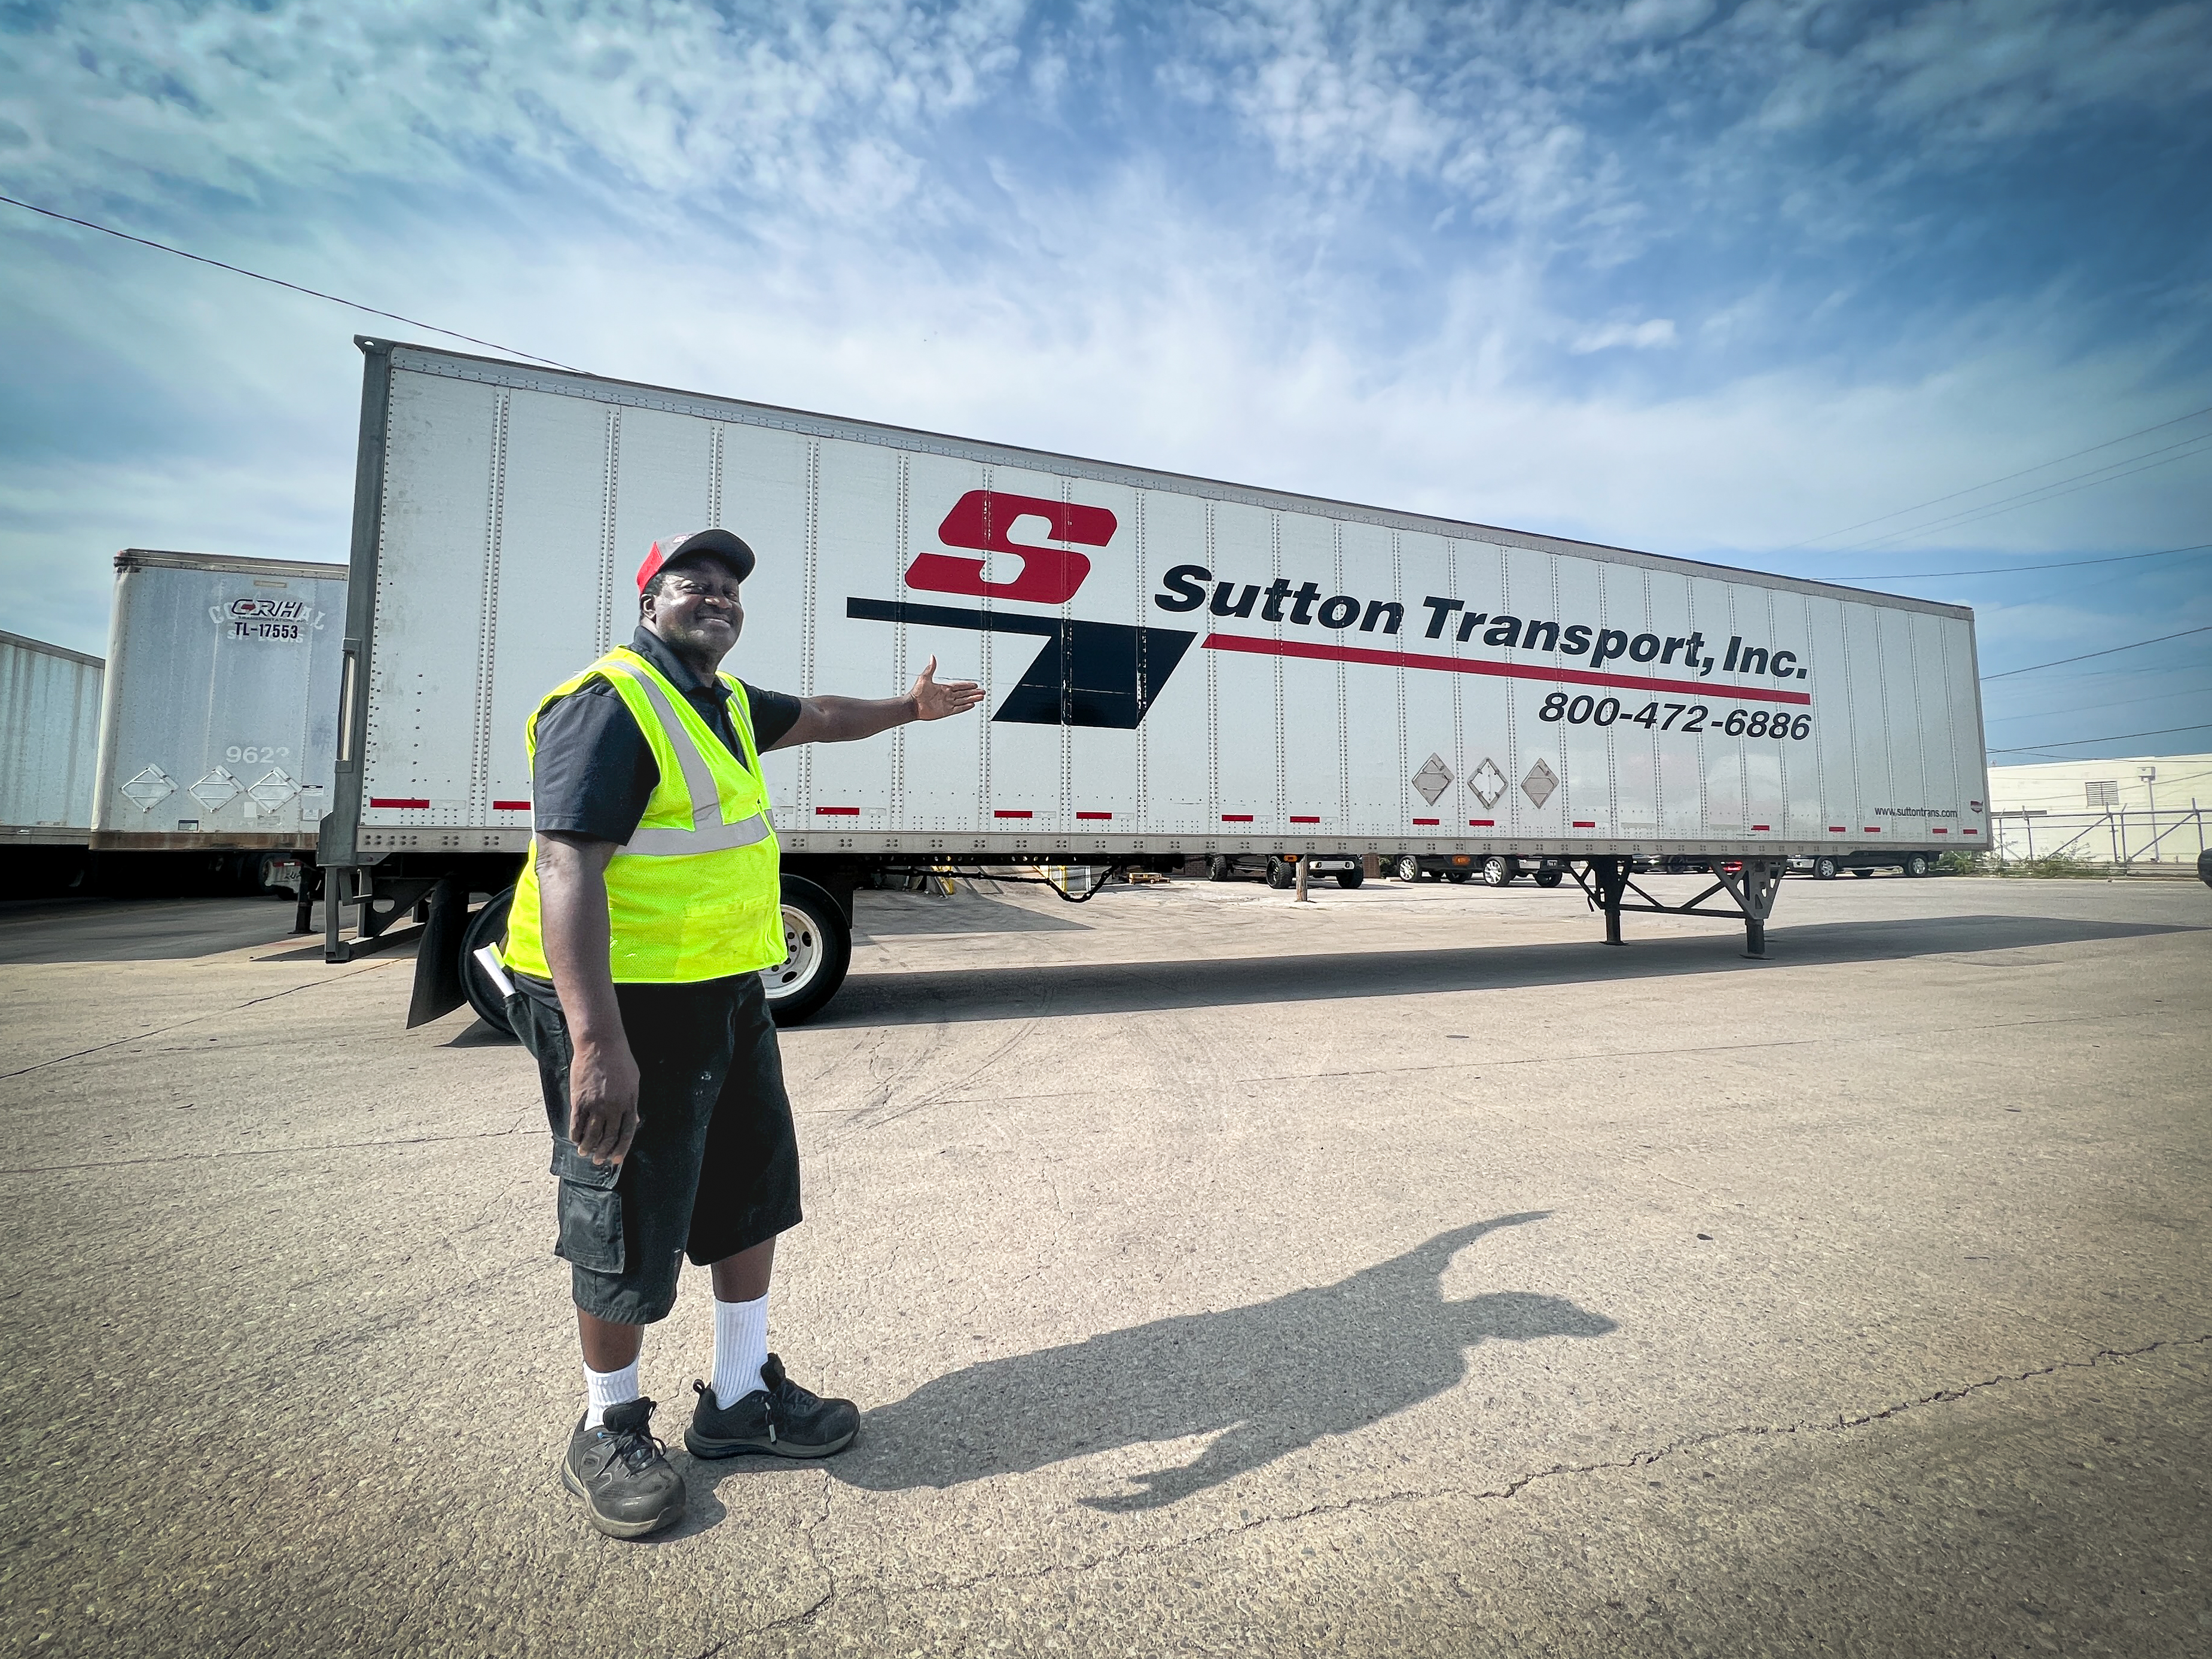 A cheerful Sutton Transport truck driver proudly points to a company truck, expressing happiness and pride in their work.